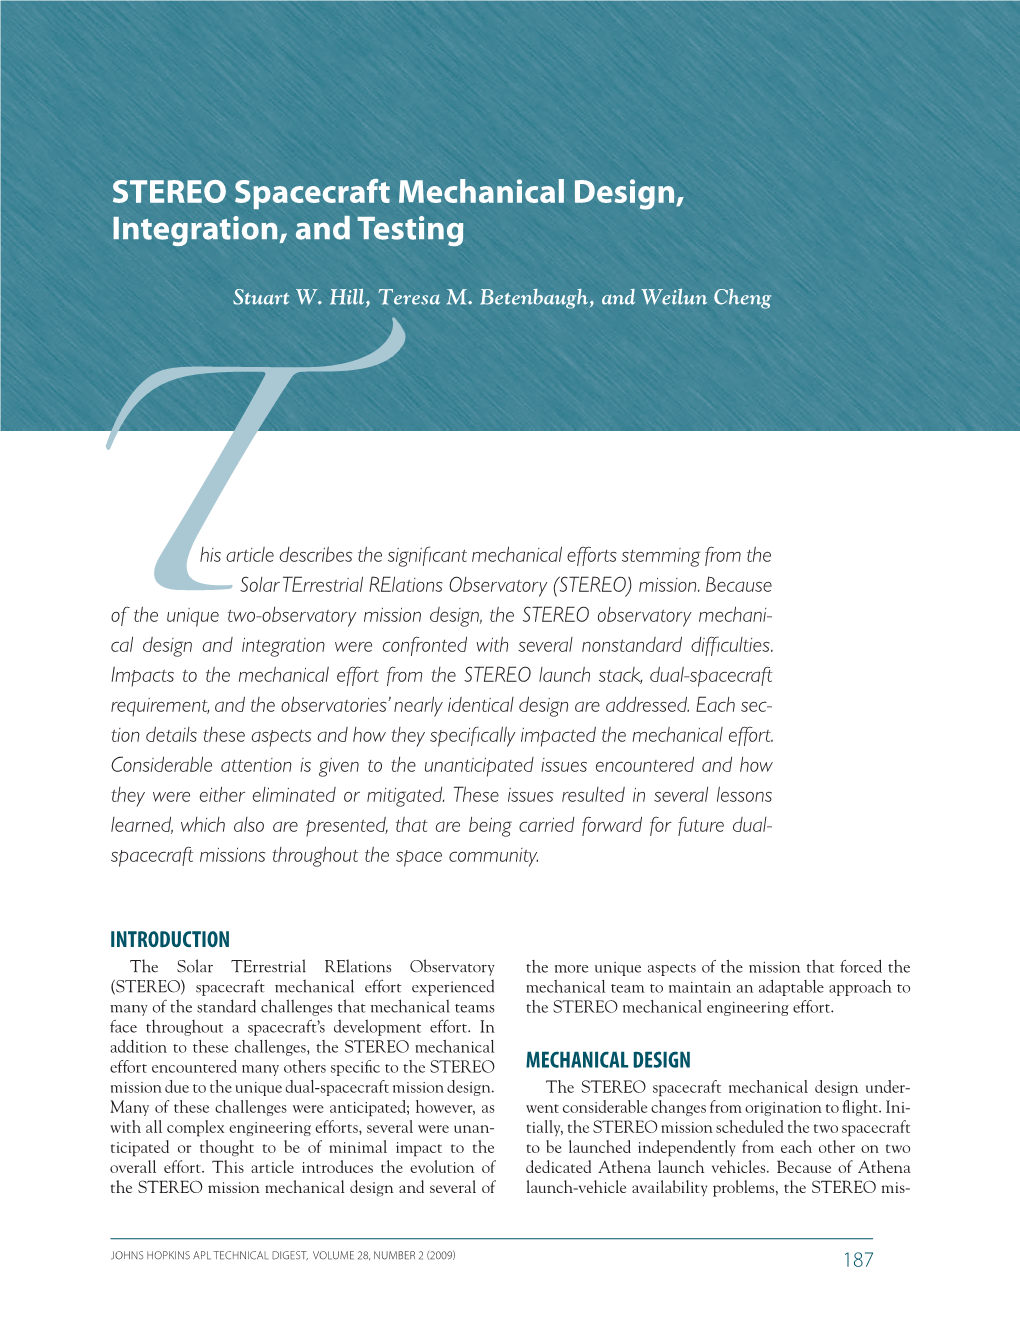 TSTEREO Spacecraft Mechanical Design, Integration, and Testing